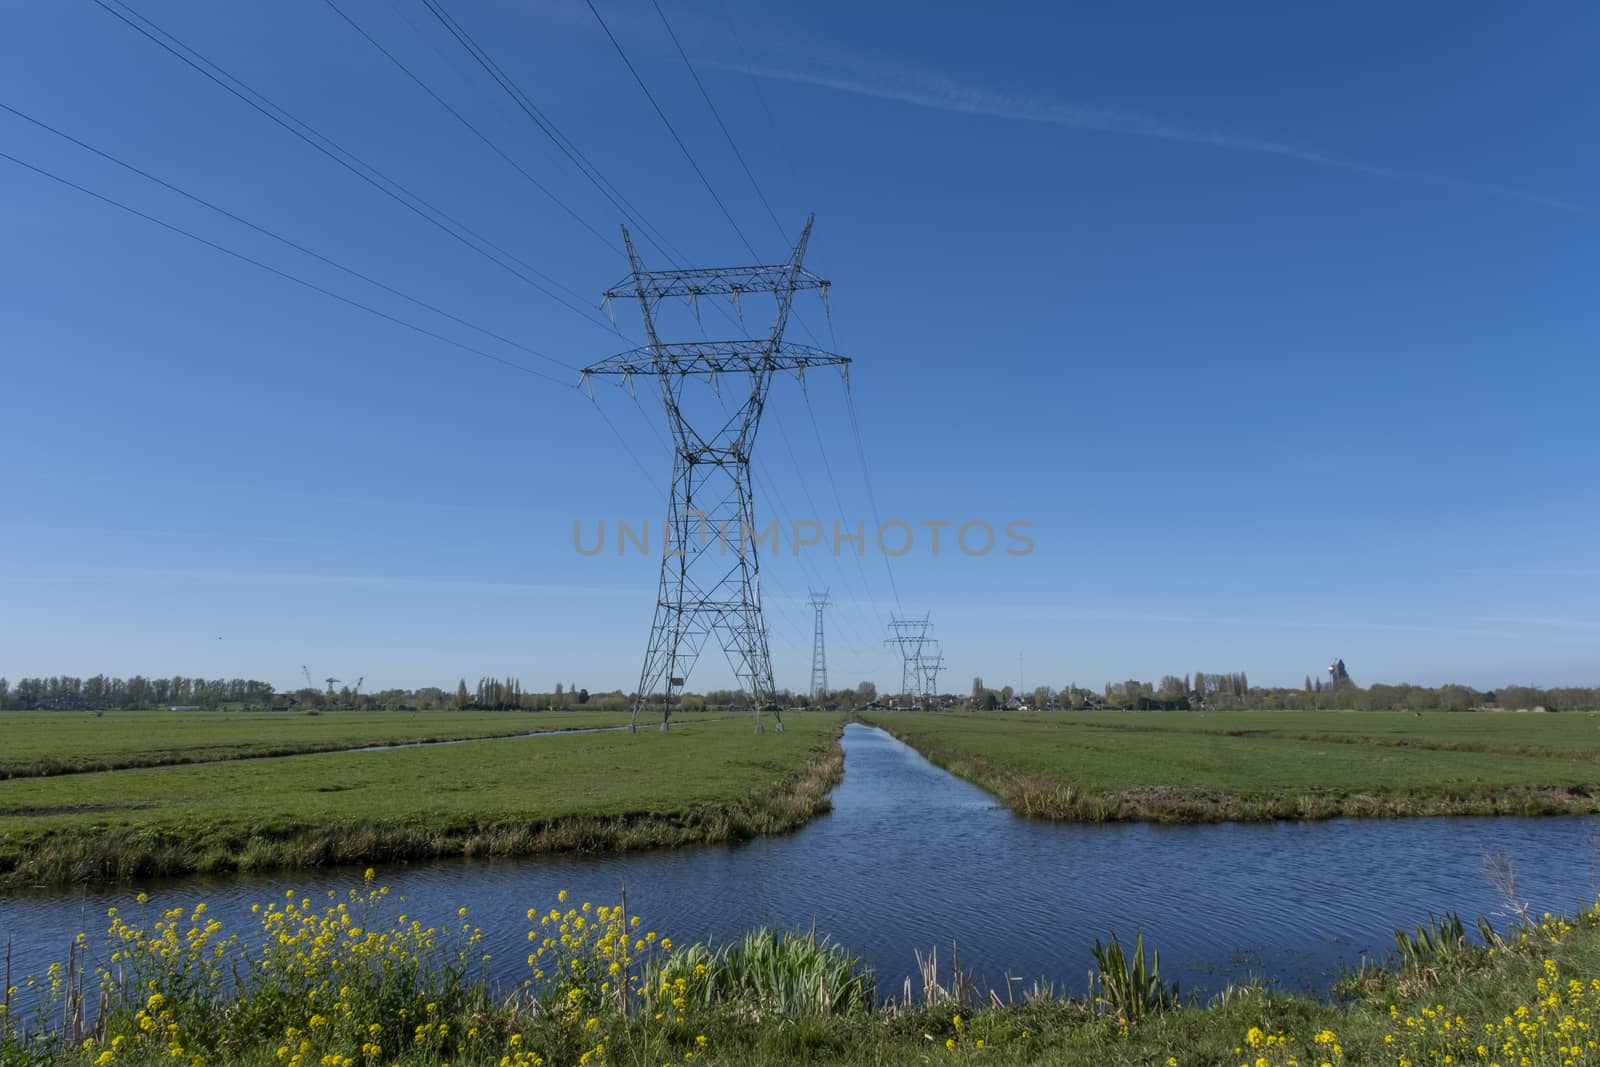 High voltage lines and power pylons in a flat and green agricultural landscape on a sunny day with cirrus clouds in the blue sky